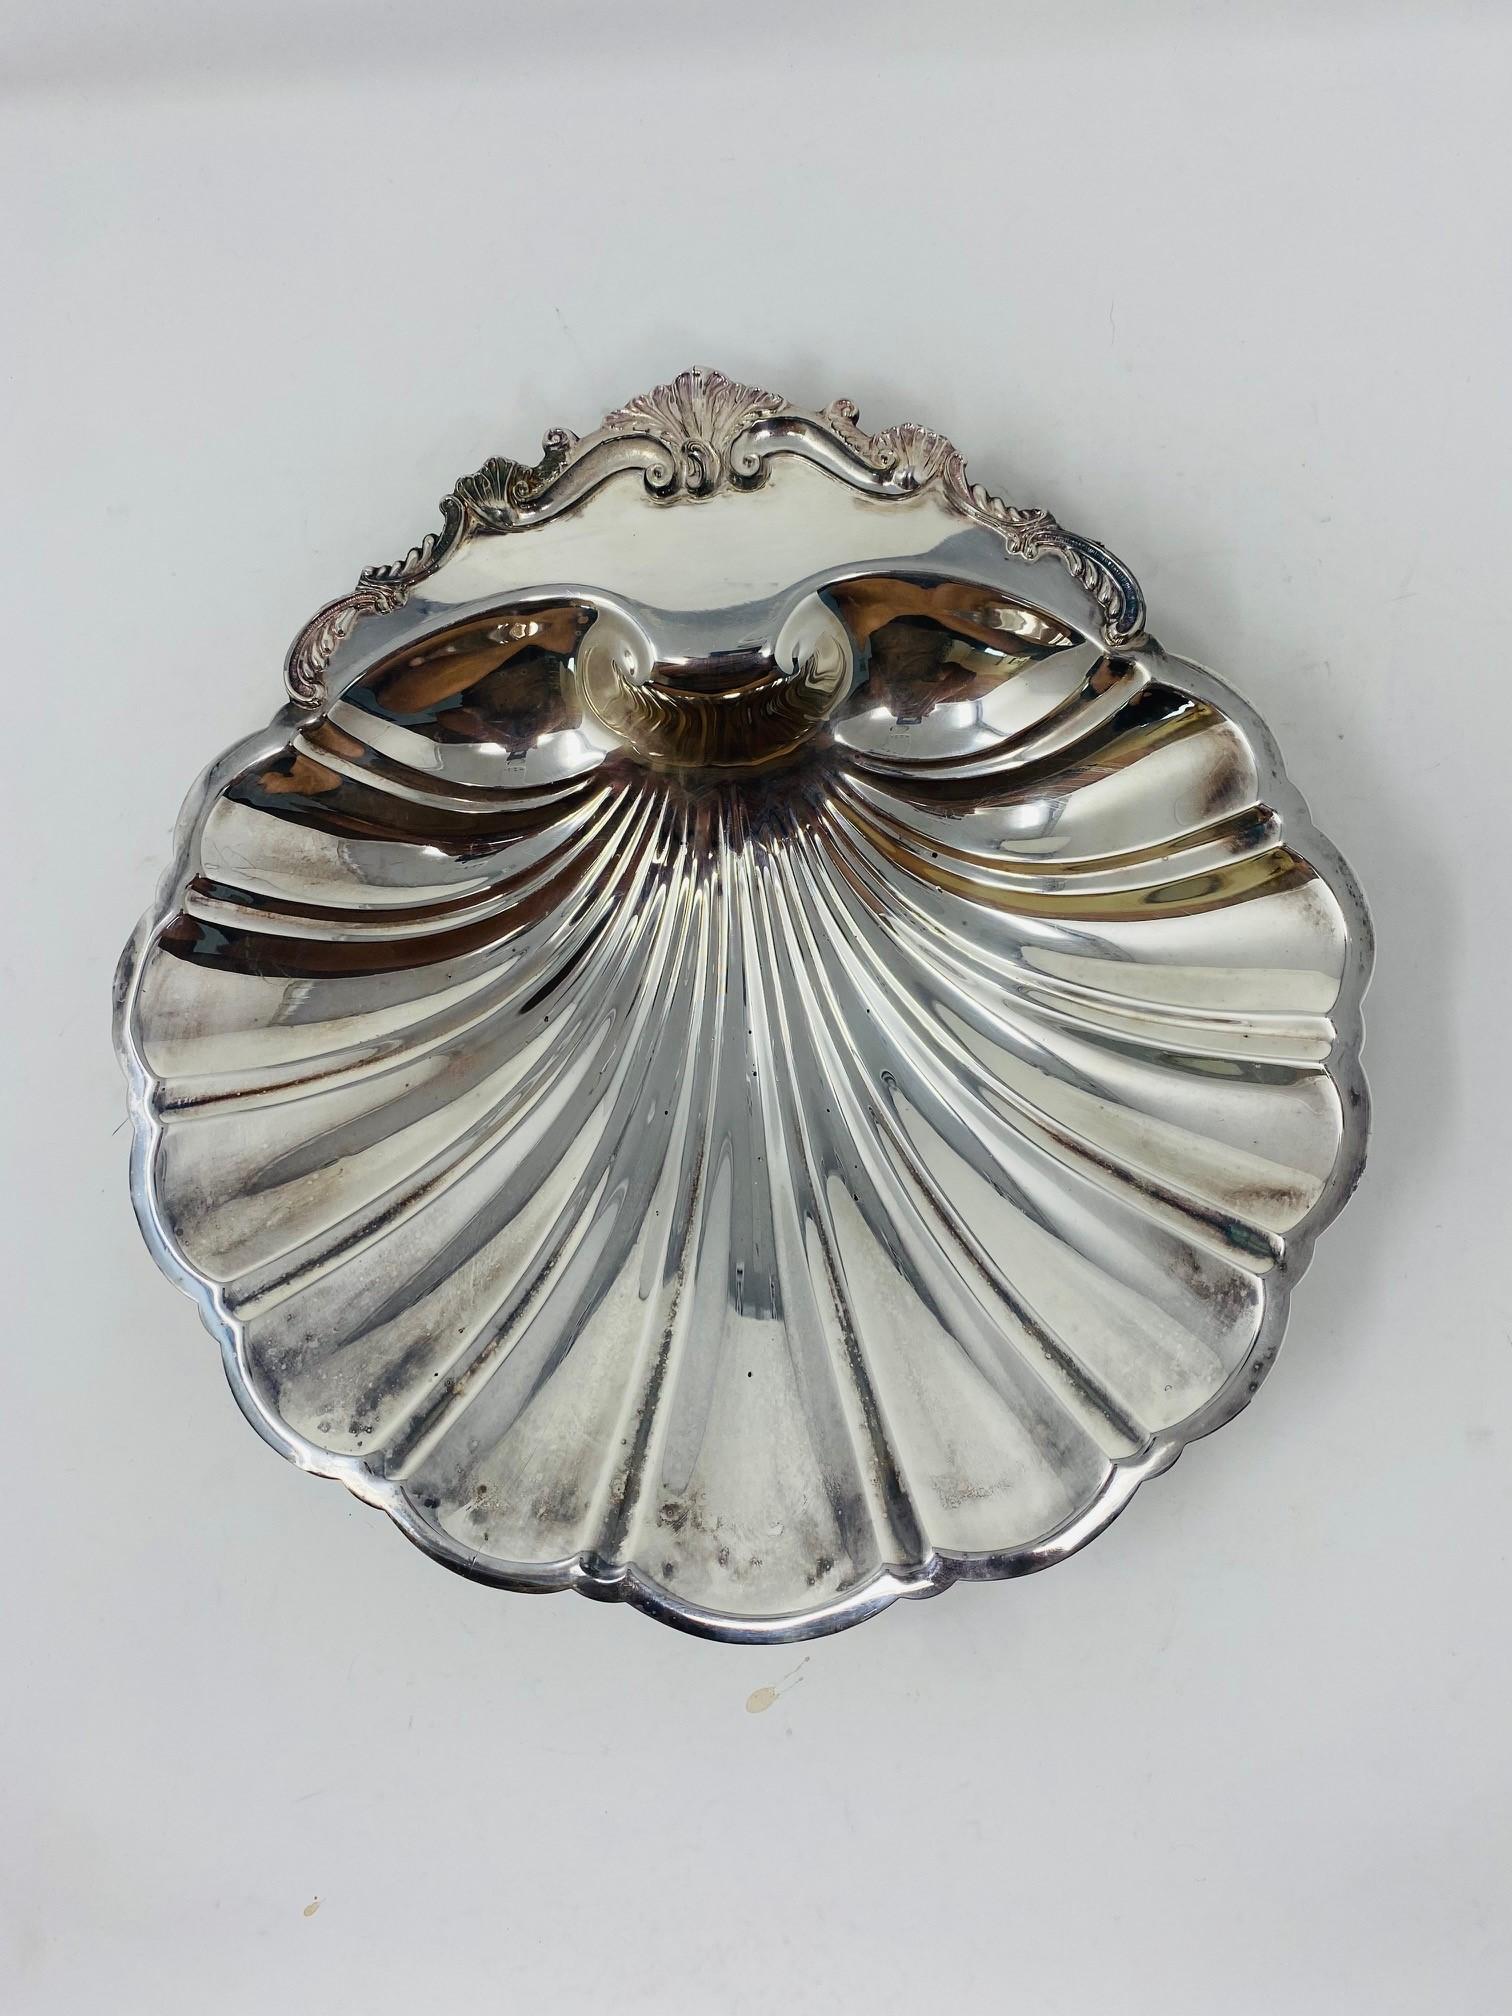 Cast Antique FB Rogers Silver Co 1824 Silver Plated Footed Shell Dish